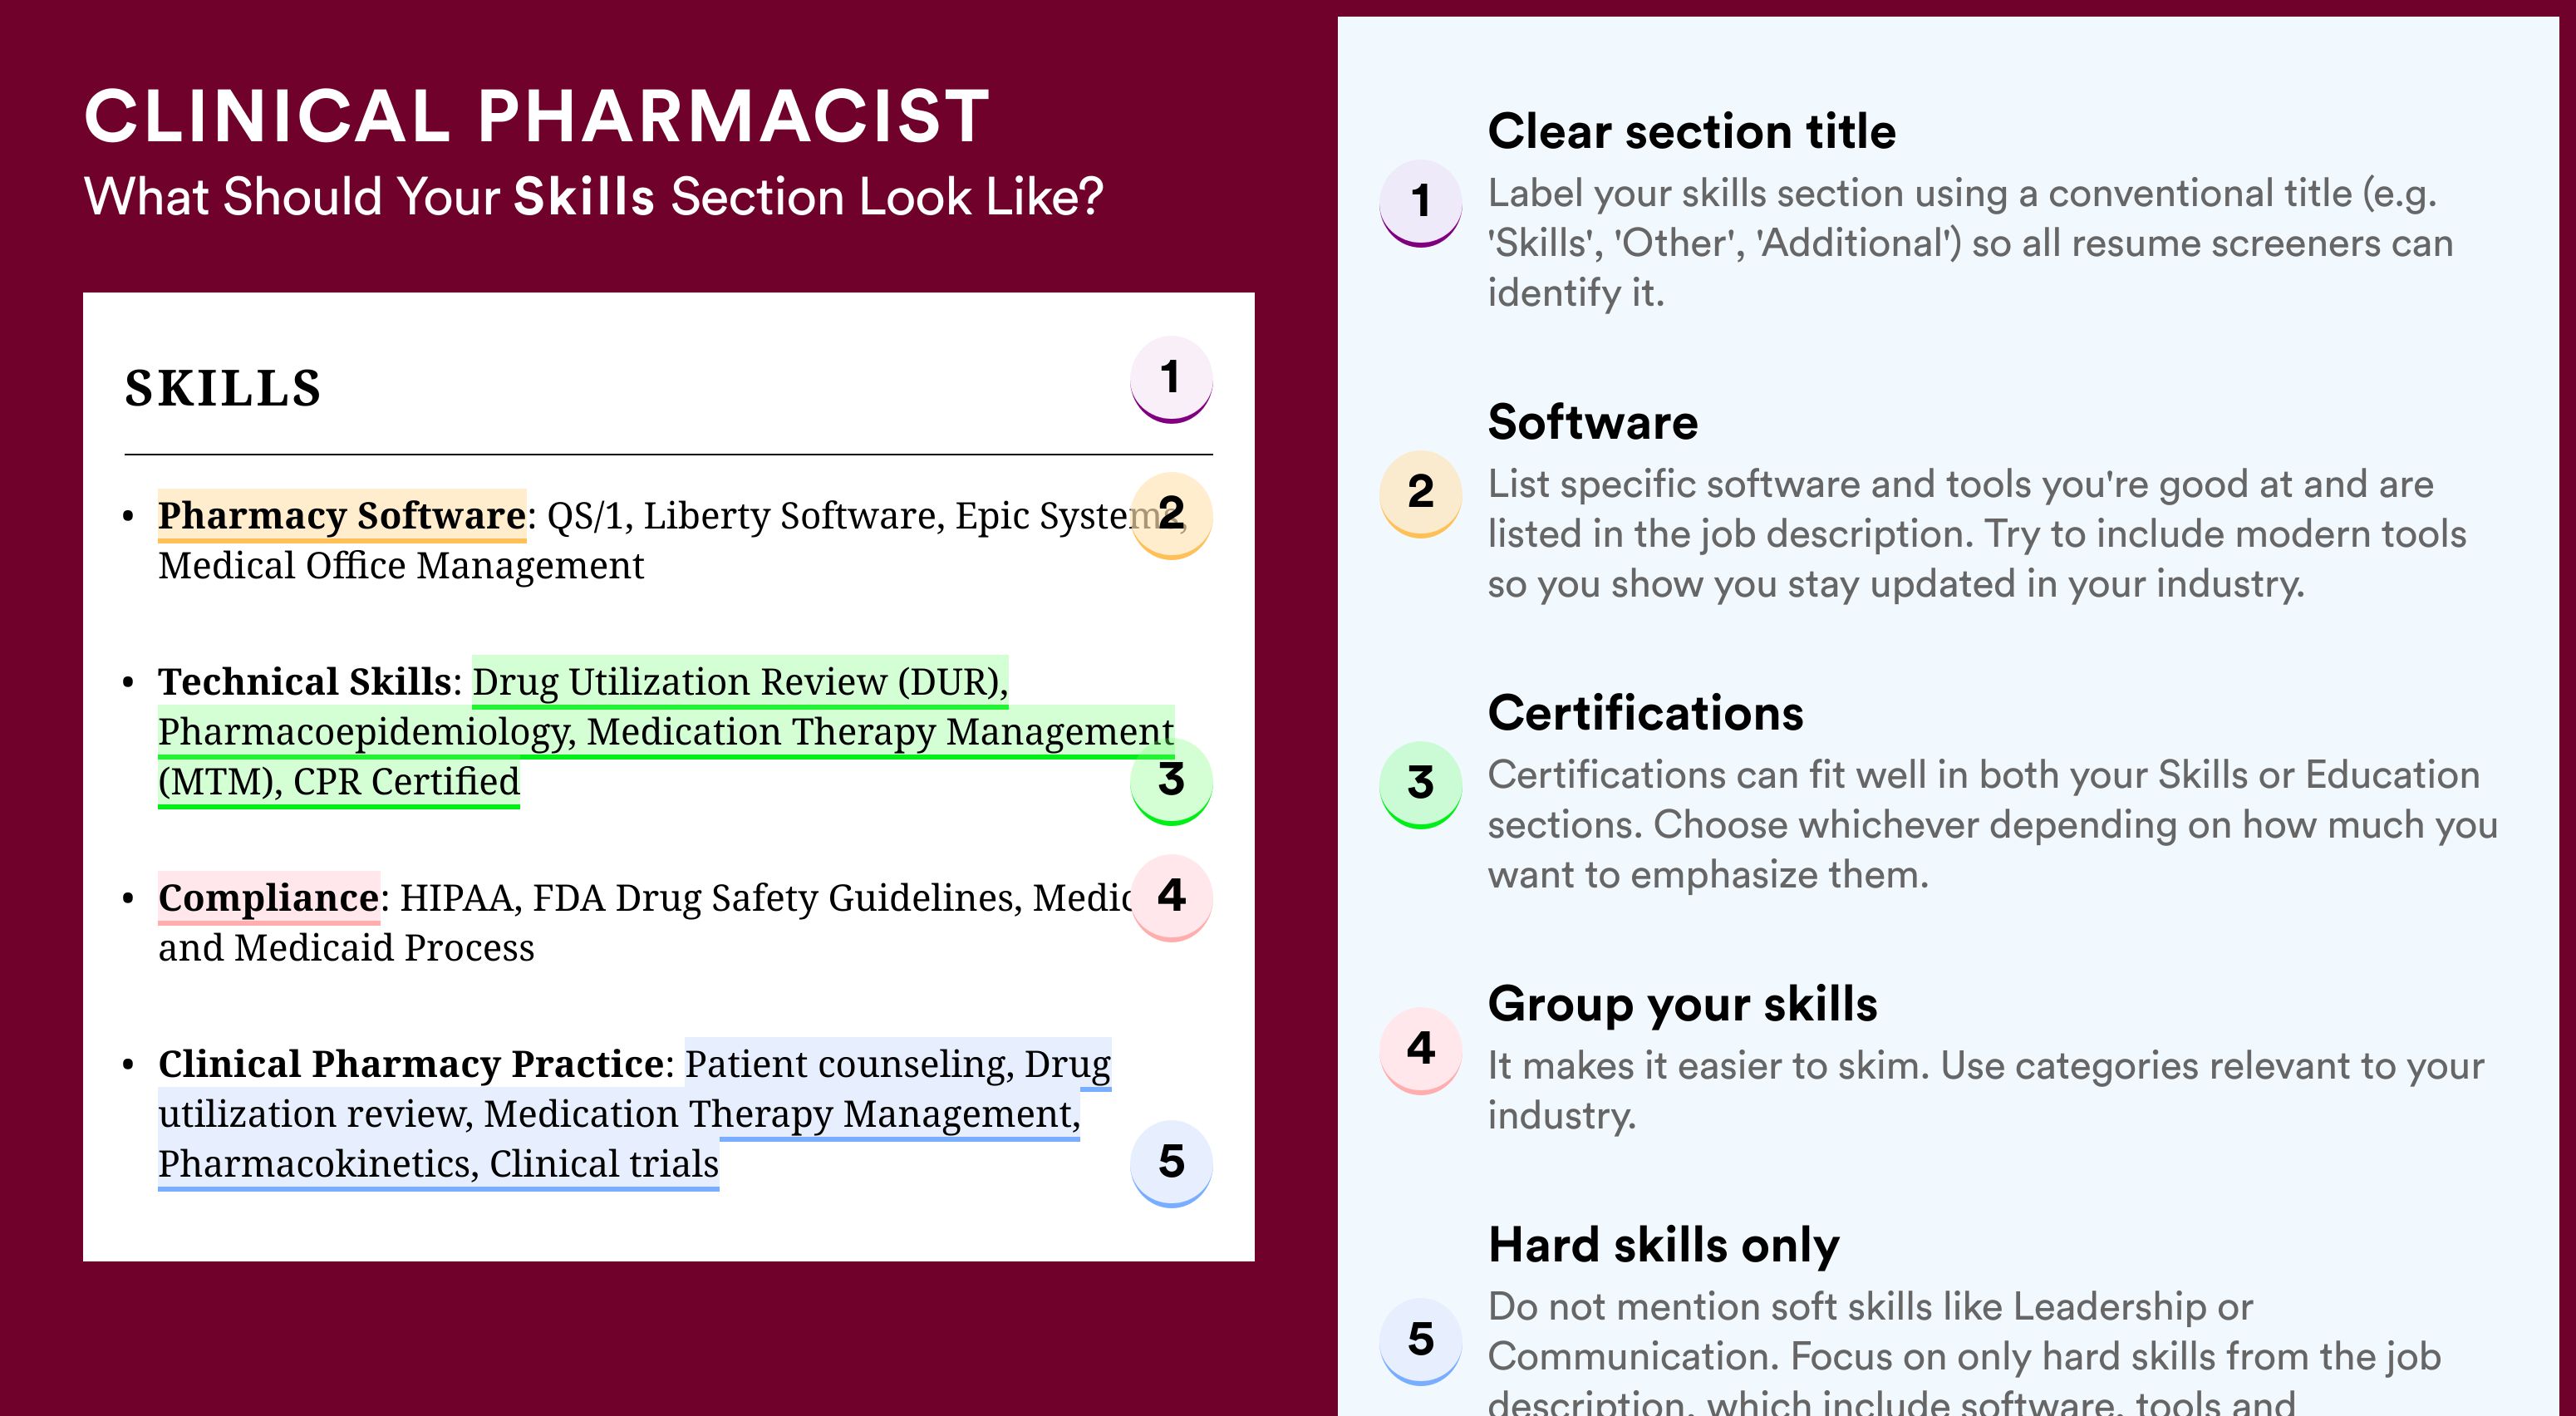 How To Write Your Skills Section - Clinical Pharmacist Roles